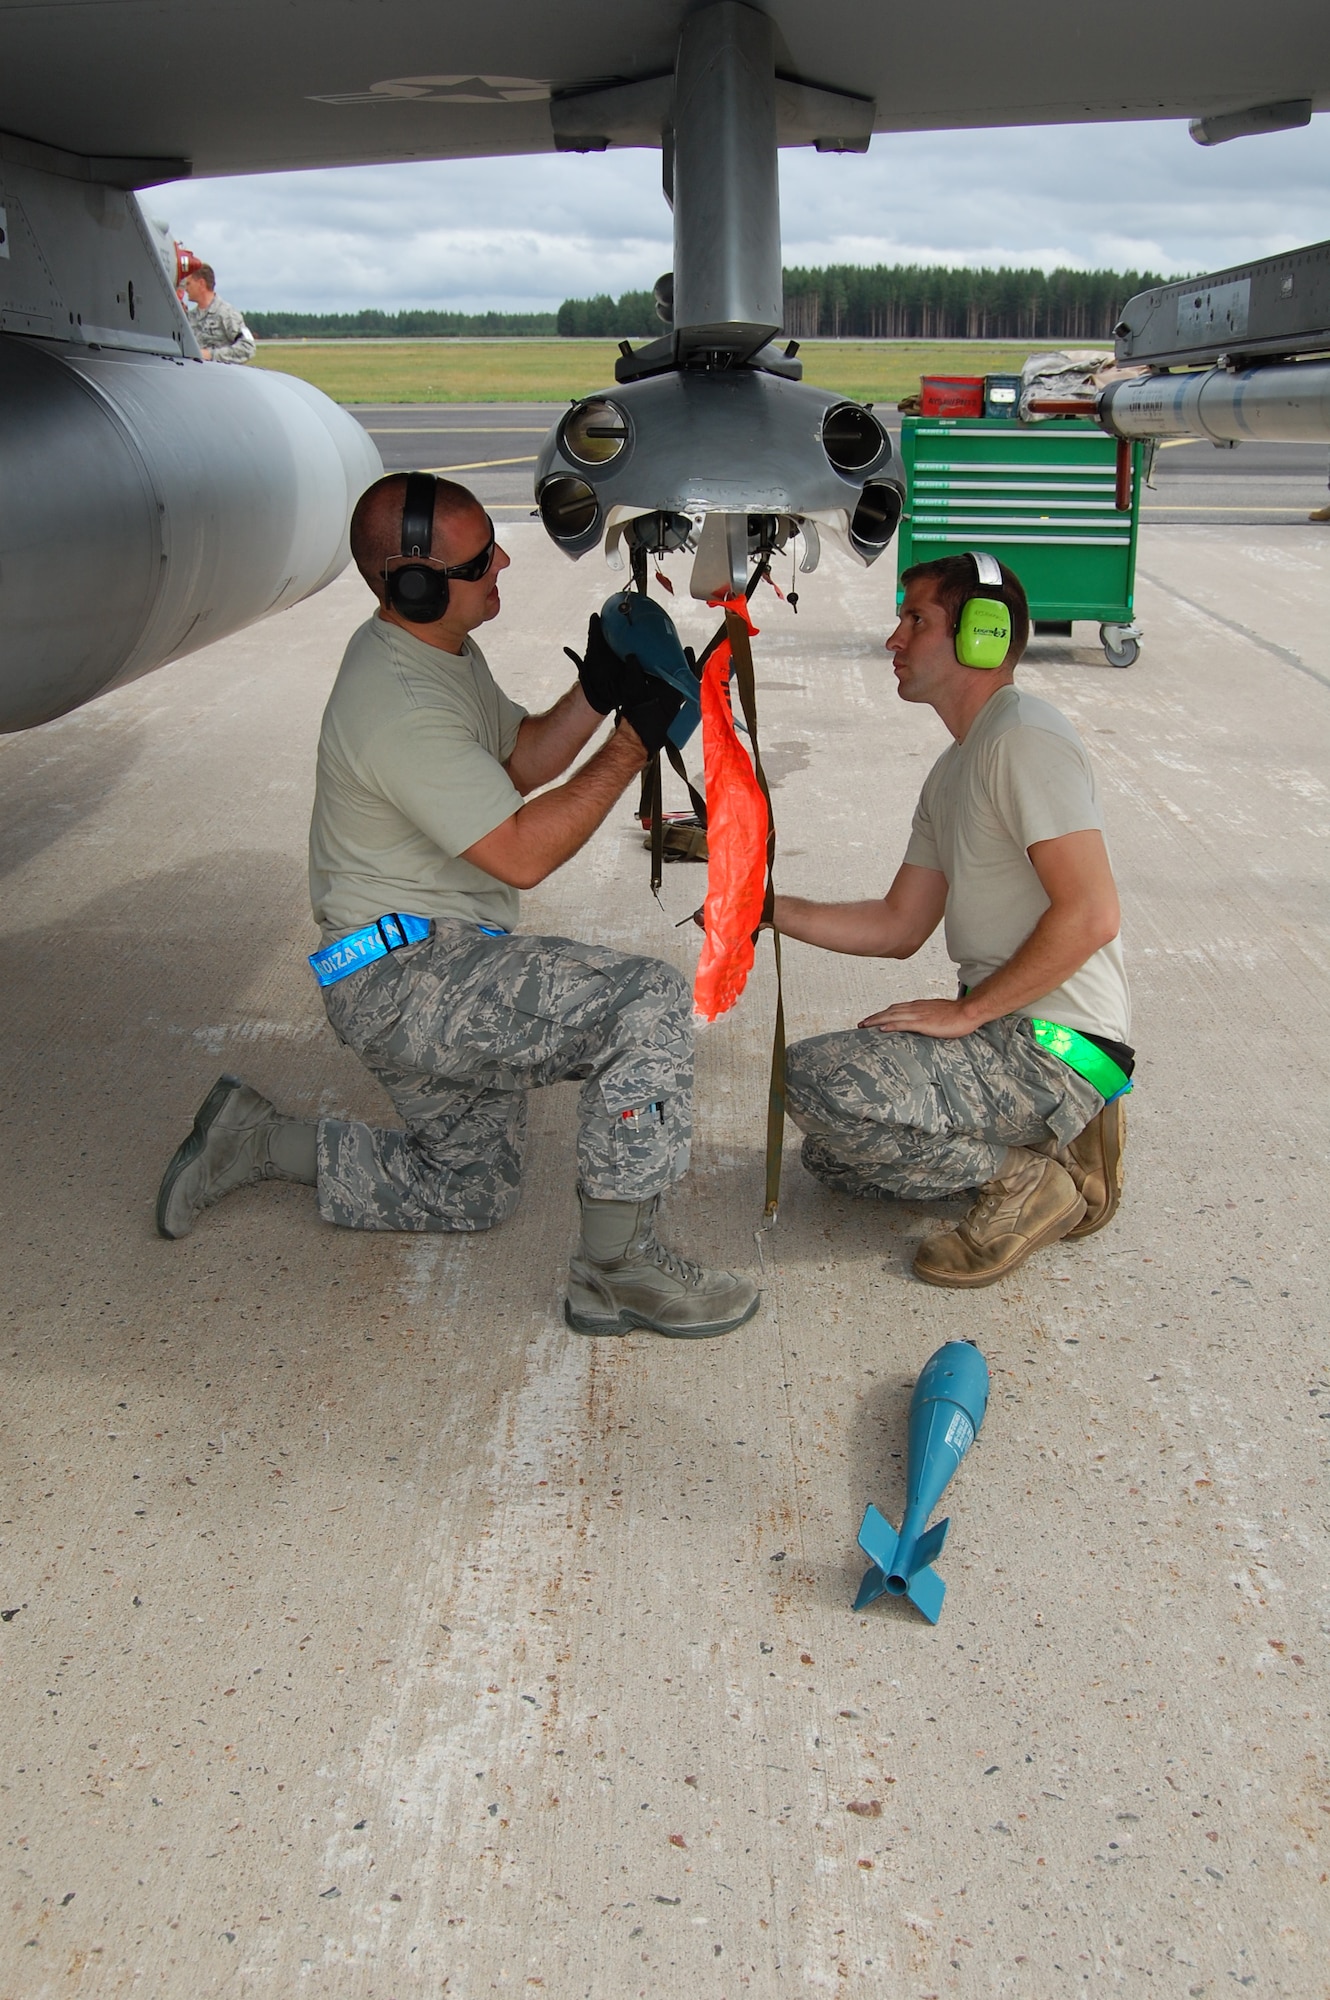 From left, Senior Airman James McAndrew, 31st Maintenance Operations Squadron weapons standardization, and Staff Sgt. John Tuscher, 31st Aircraft Maintenance Squadron weapons load crew member, load practice munitions onto an F-16 Aug. 5, 2010 at Kallax Air Base, Sweden. The 555th Fighter Squadron and 31st AMXS conducted more than 180 air-to-air and air-to-ground missions during a two week exercise at the air base in which they worked alongside the Swedish air force's Norrbotten Wing. (U.S. Air Force photo by Tech. Sgt. Lindsey Maurice/Released)